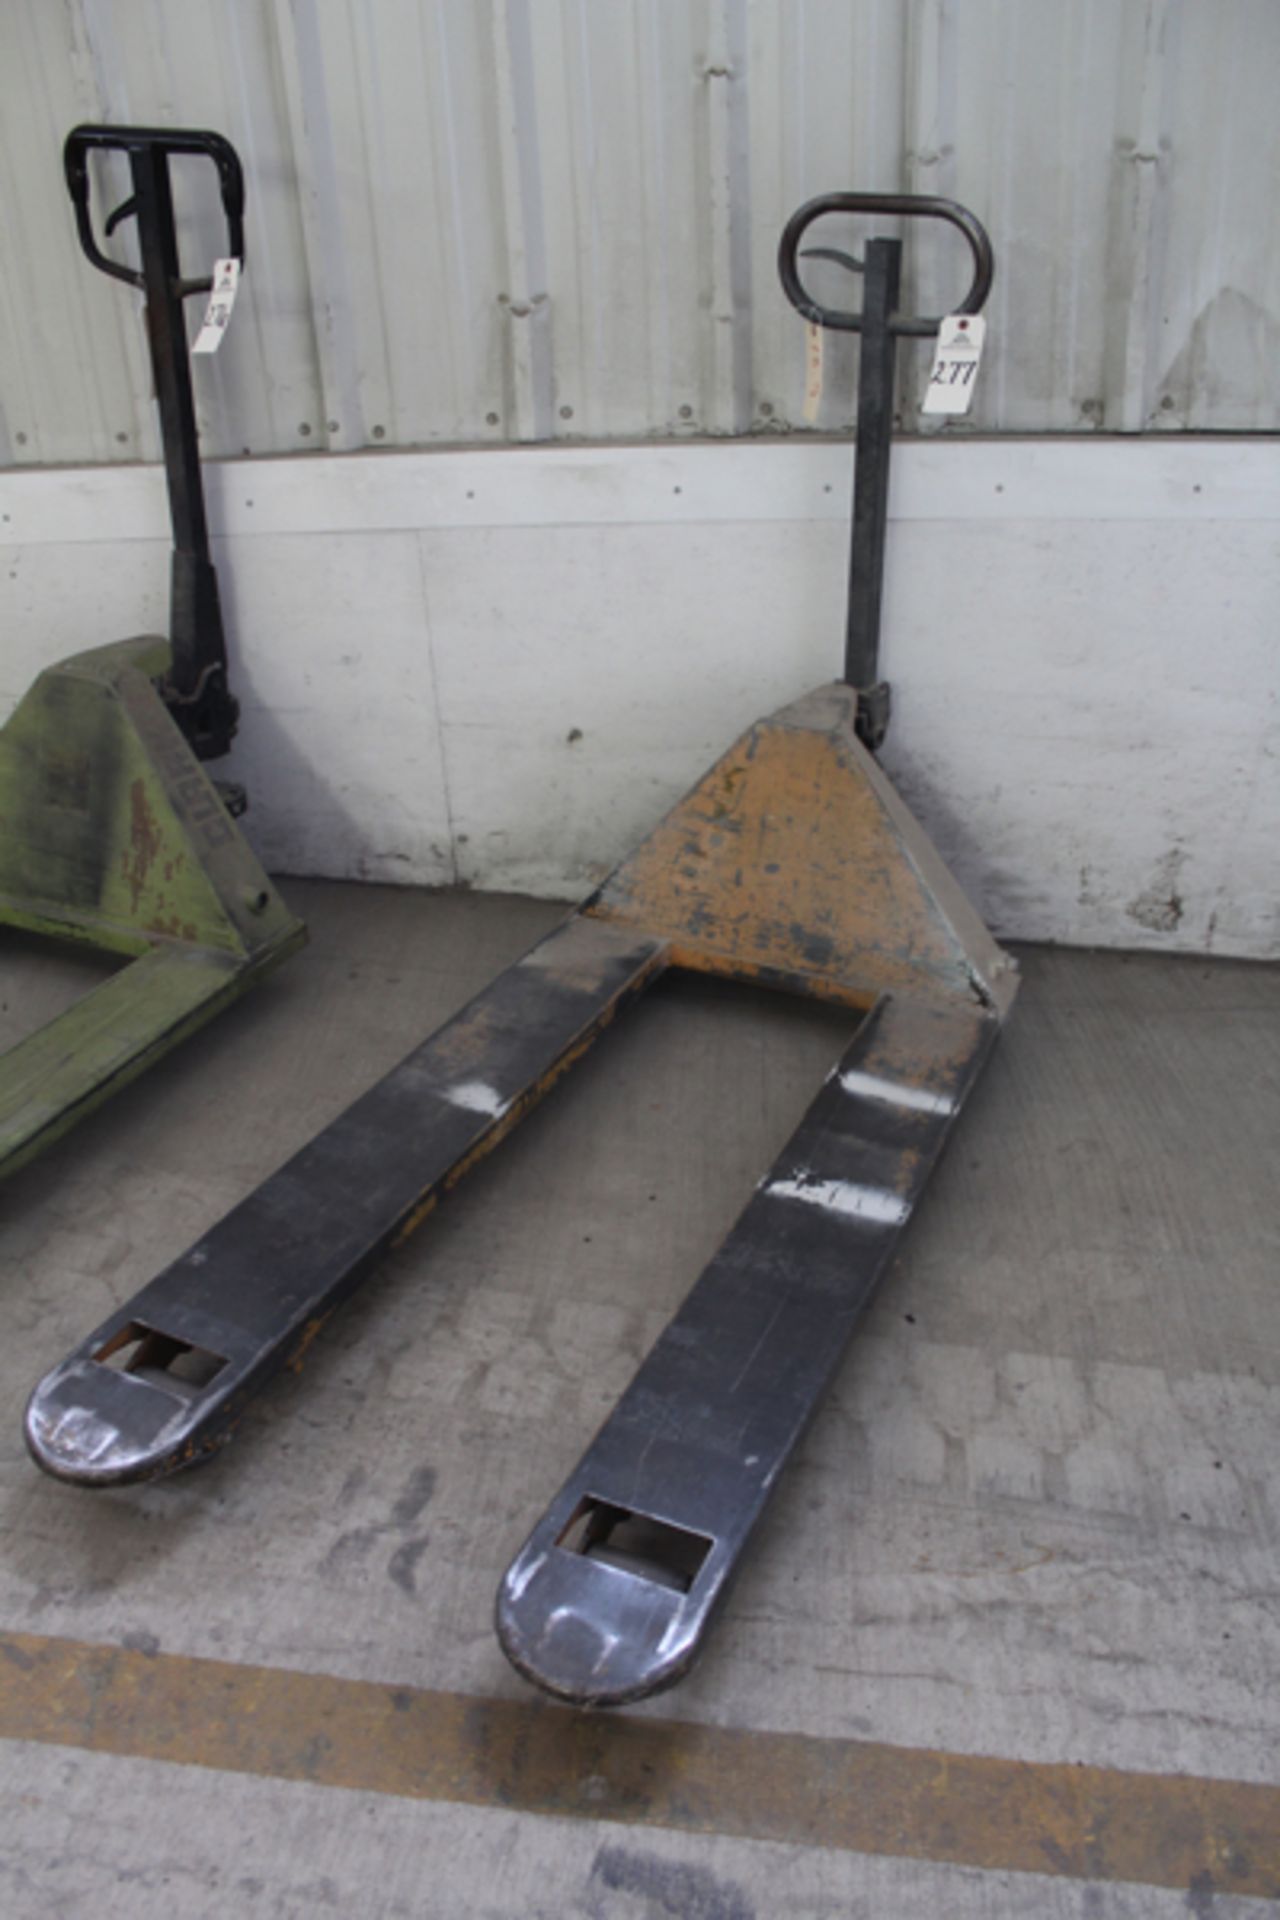 Pallet Jack | Rigging Price: Hand Carry or Contact Rigger